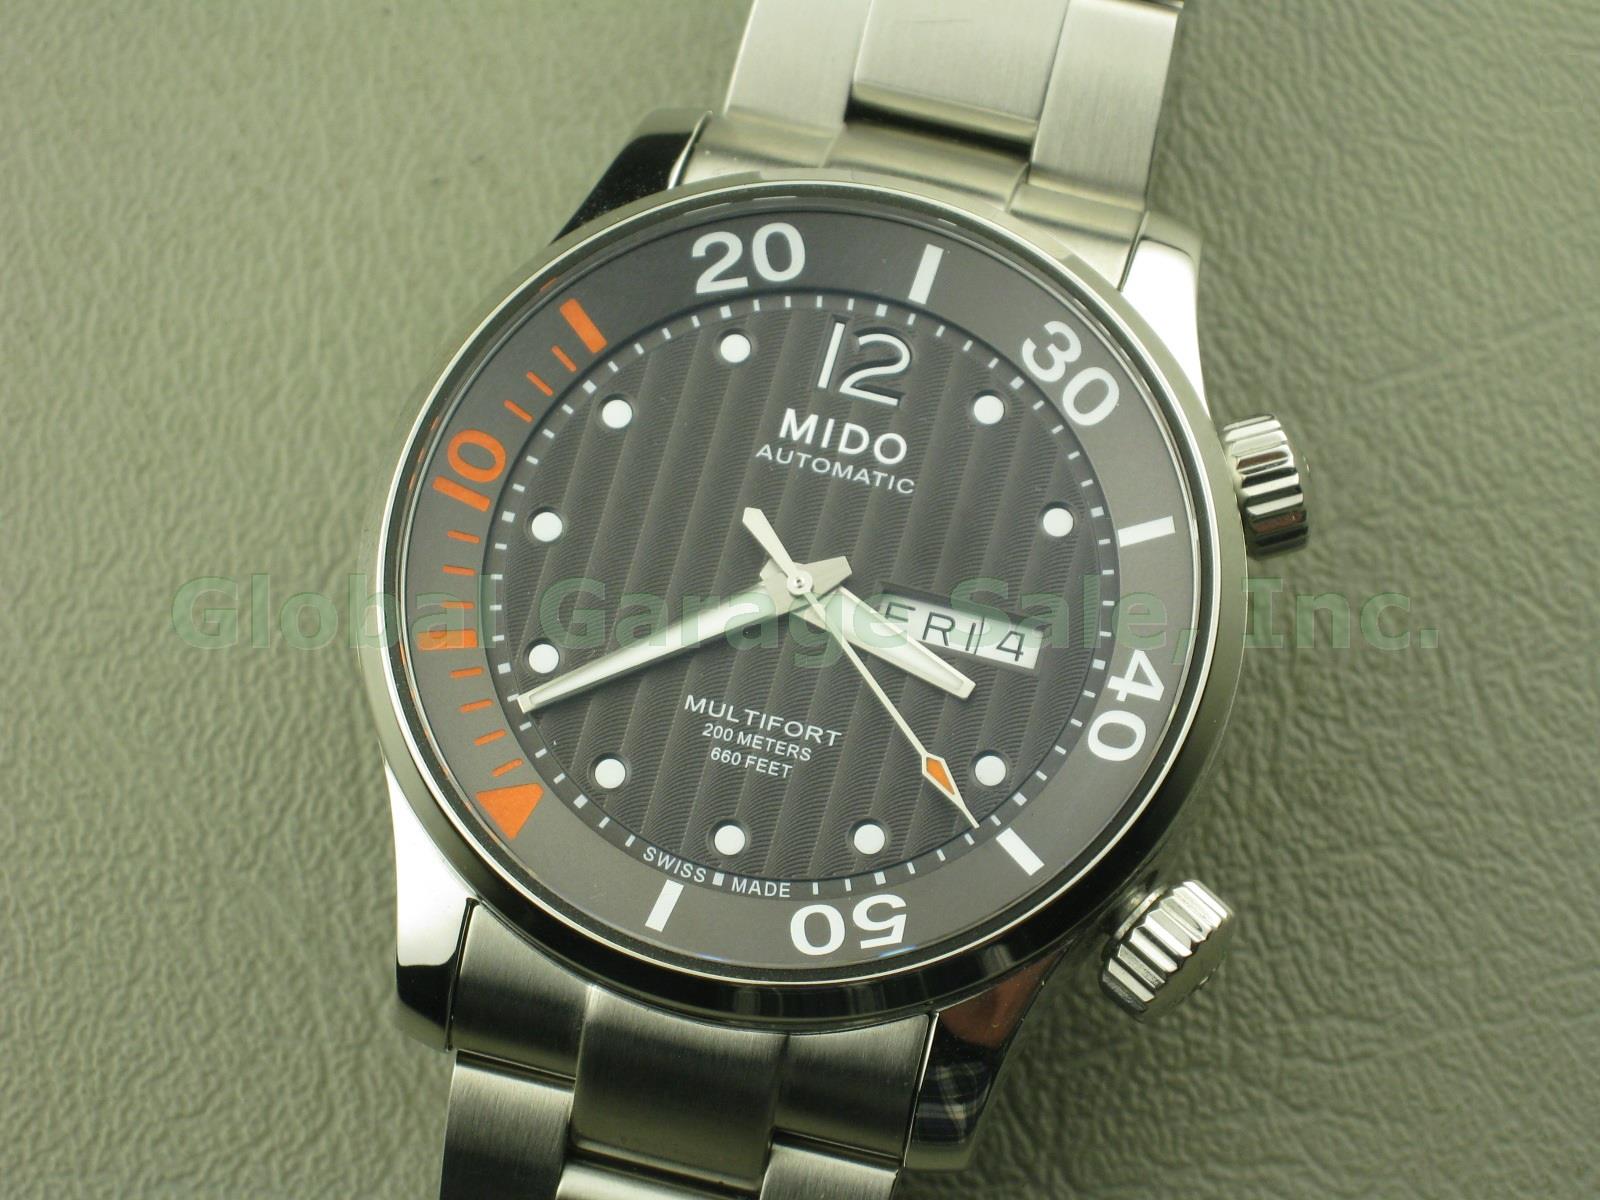 Mido Multifort M005930 A 42mm Two Crown Automatic 200M Swiss Diver Watch W/ Box+ 6